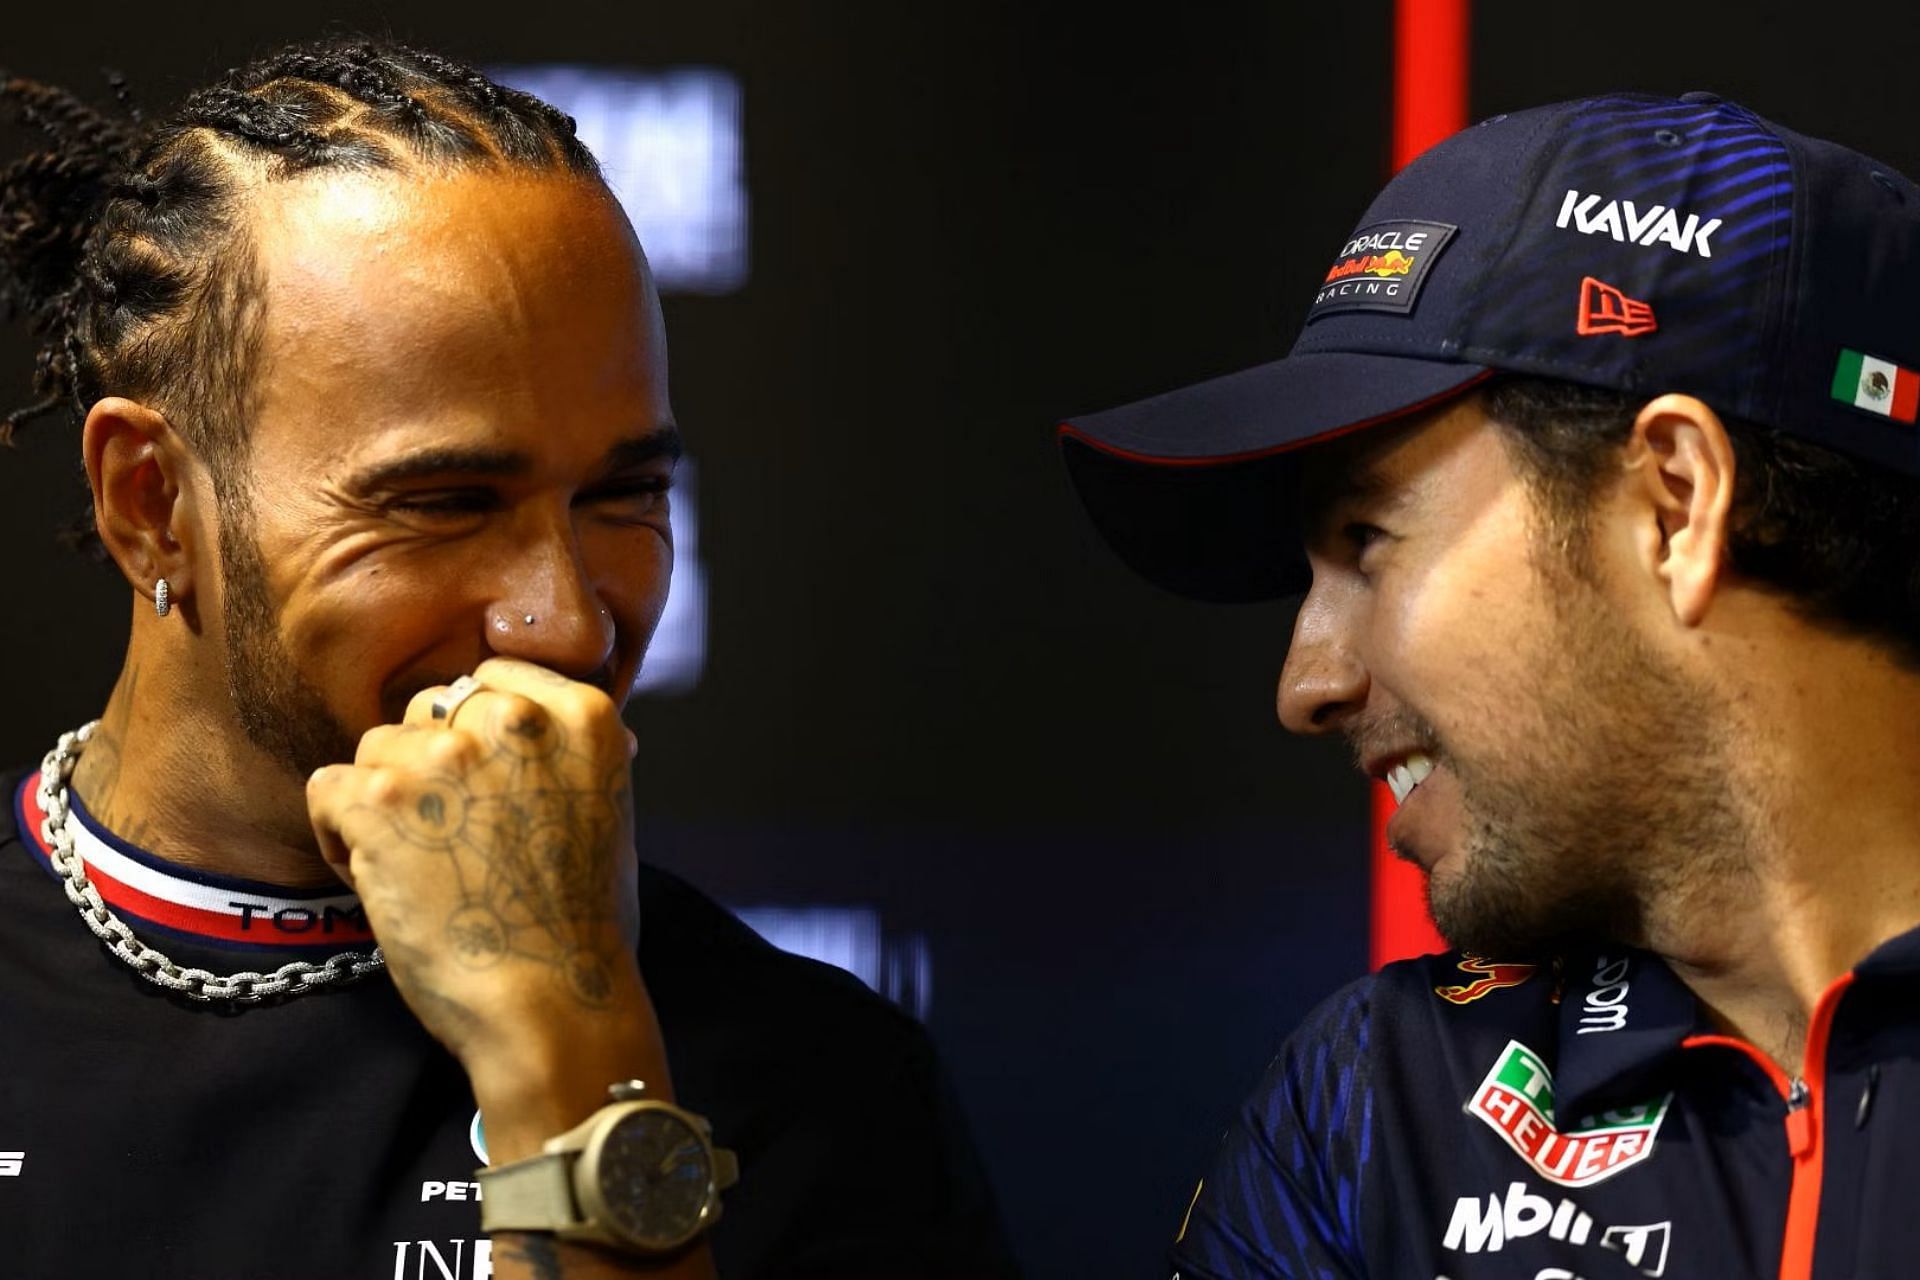 Lewis Hamilton talks with Sergio Perez in the Drivers Press Conference during previews ahead of the 2023 F1 Saudi Arabian Grand Prix. (Photo by Bryn Lennon/Getty Images)